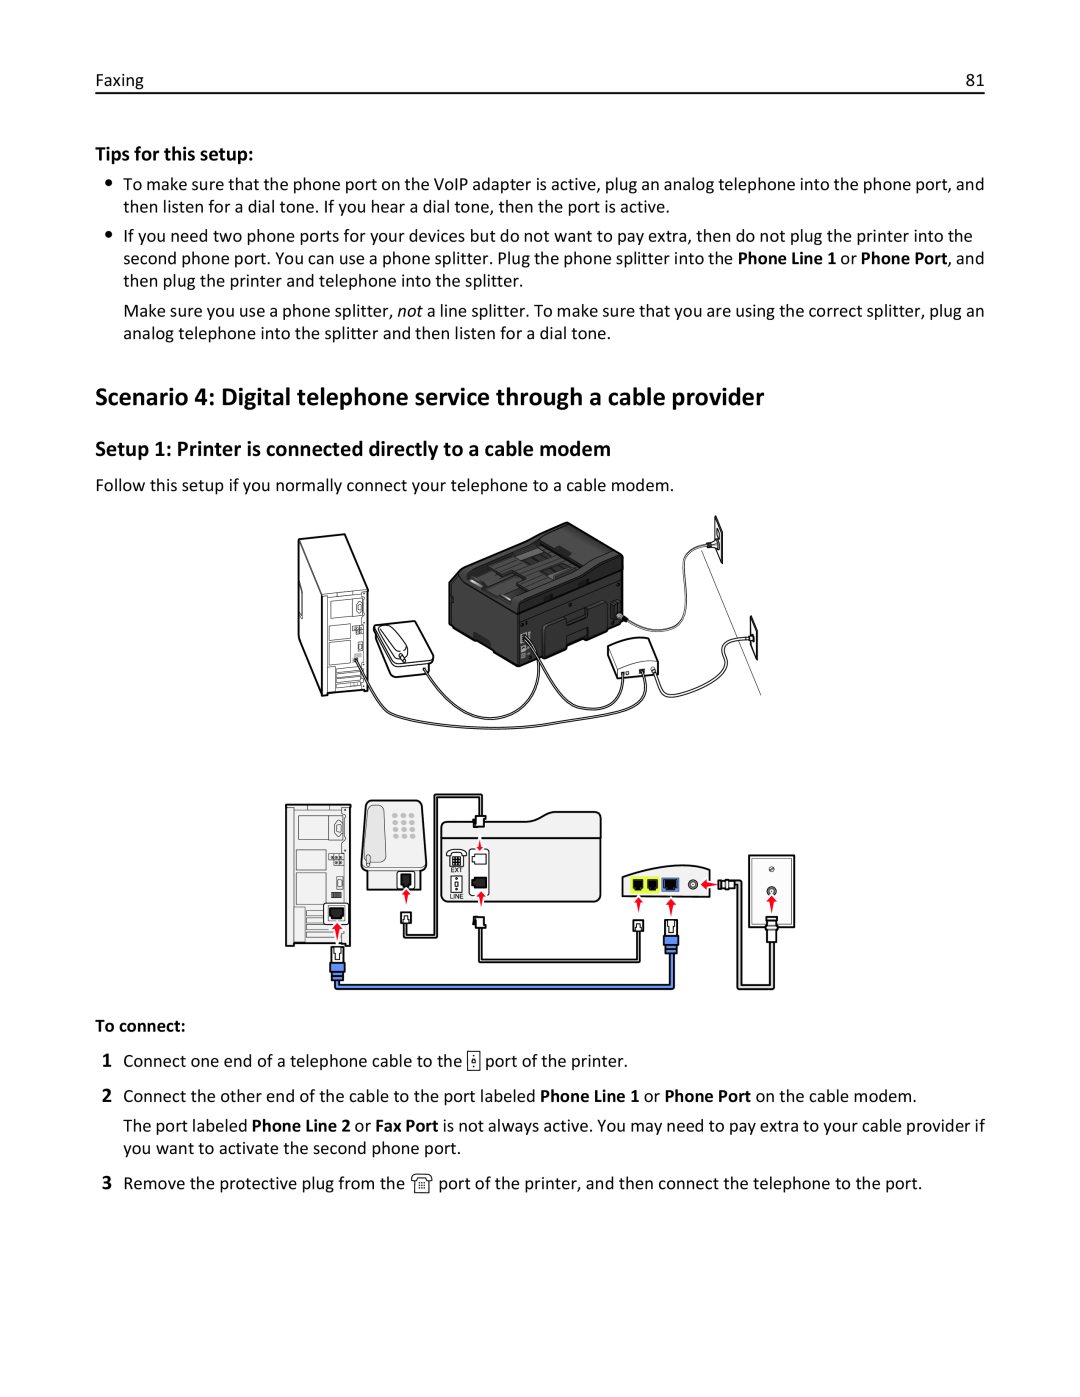 Lexmark PRO4000C, 90P3000 Scenario 4 Digital telephone service through a cable provider, Tips for this setup, To connect 